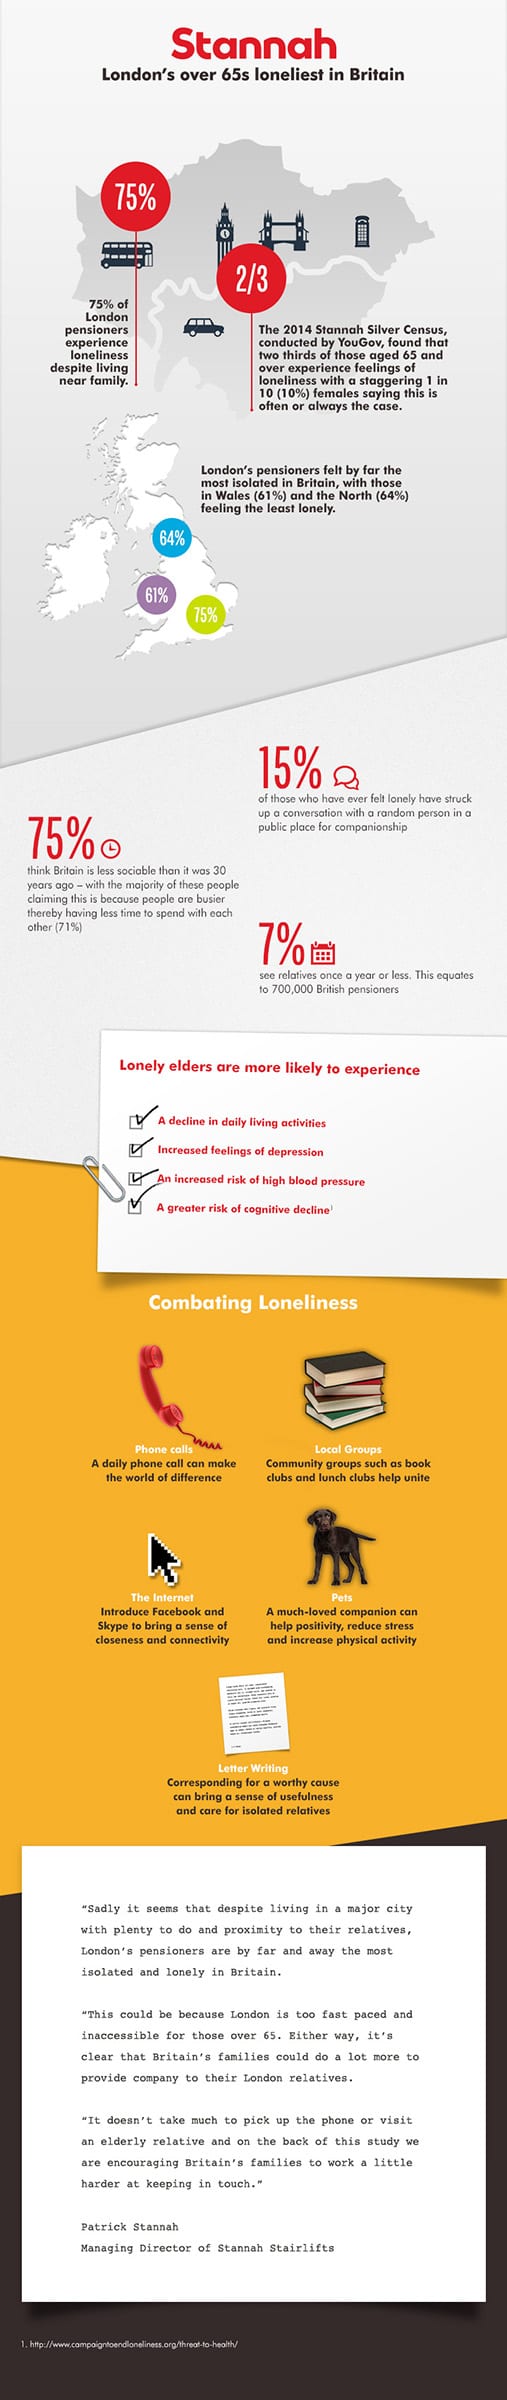 sdtannah-loneliness-infographic